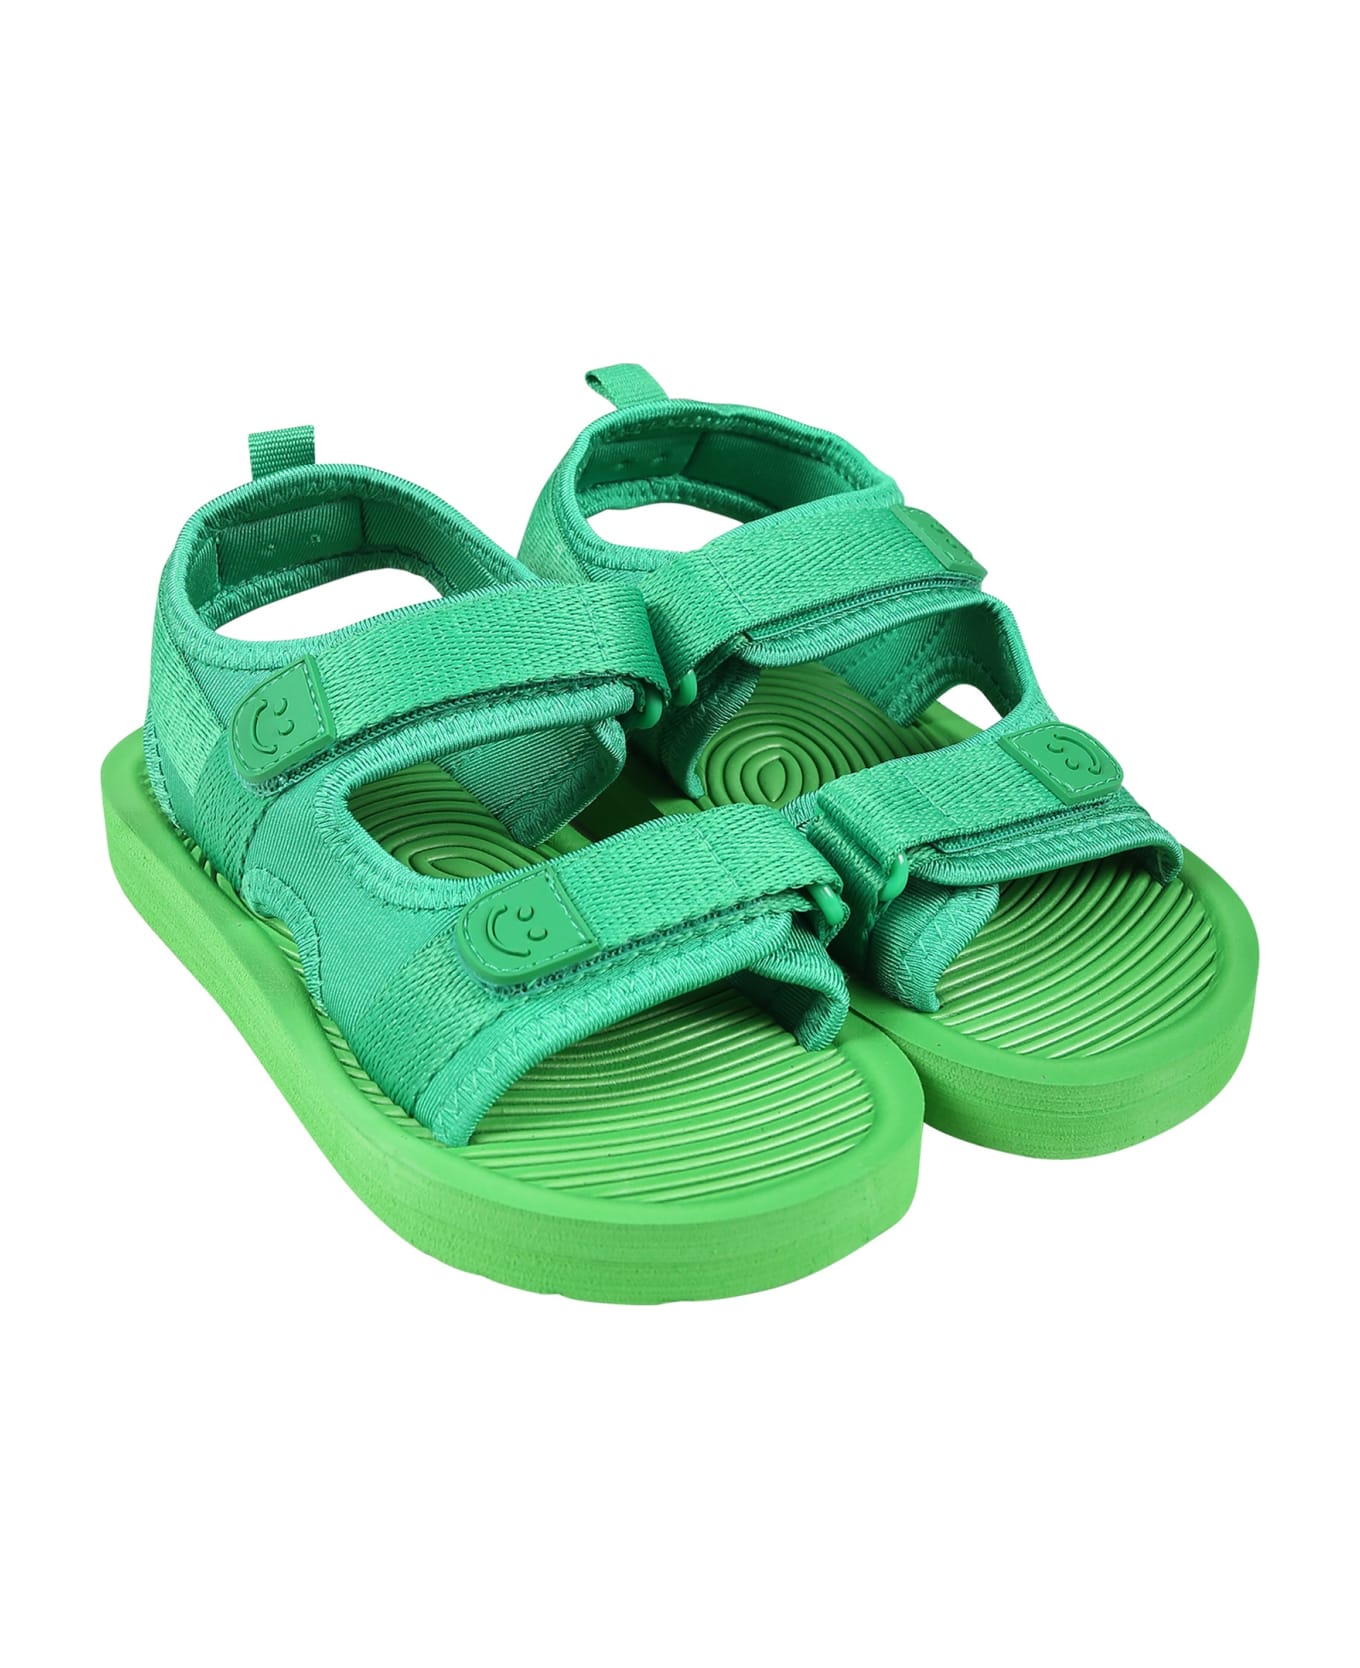 Molo Green Sandals For Kids With Logo - Green